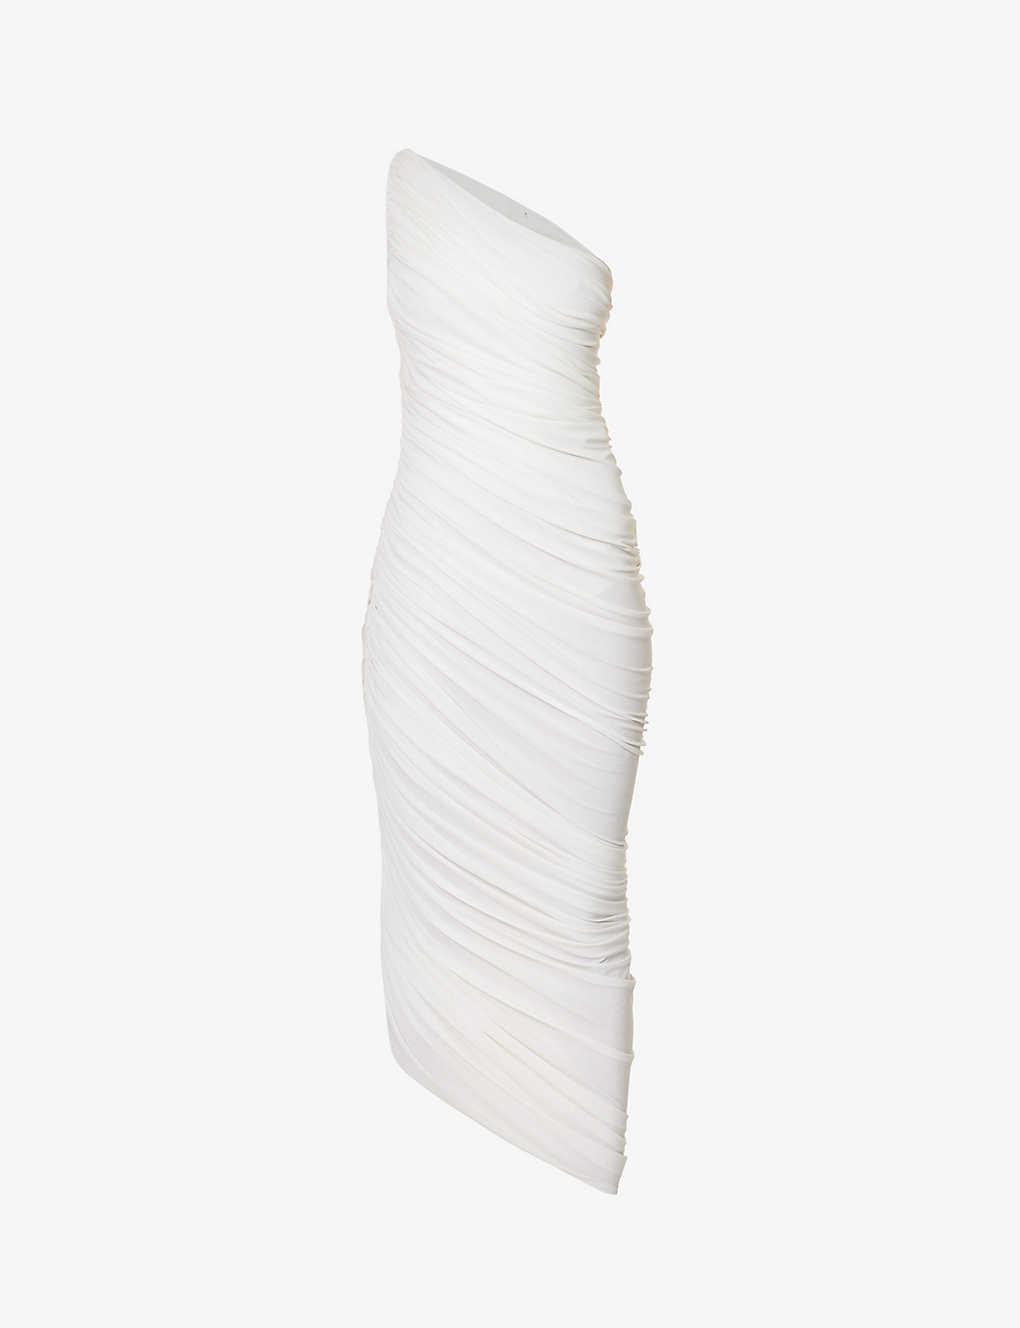 Norma Kamali Diana Ruched Stretch-woven Maxi Dress in White | Lyst UK